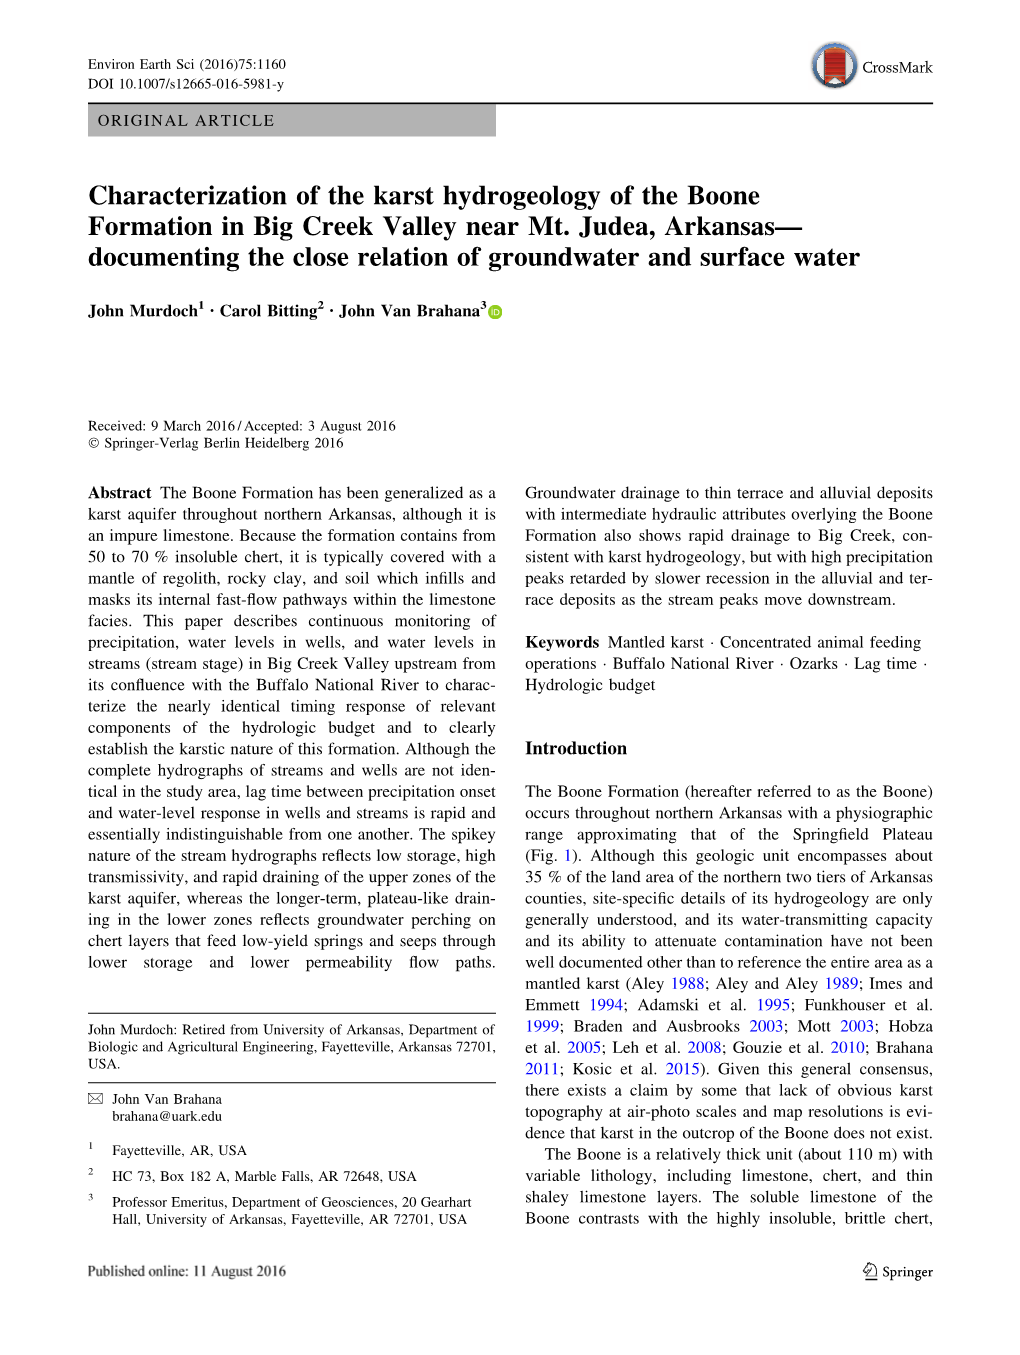 Characterization of the Karst Hydrogeology of the Boone Formation in Big Creek Valley Near Mt. Judea, Arkansas—Documenting